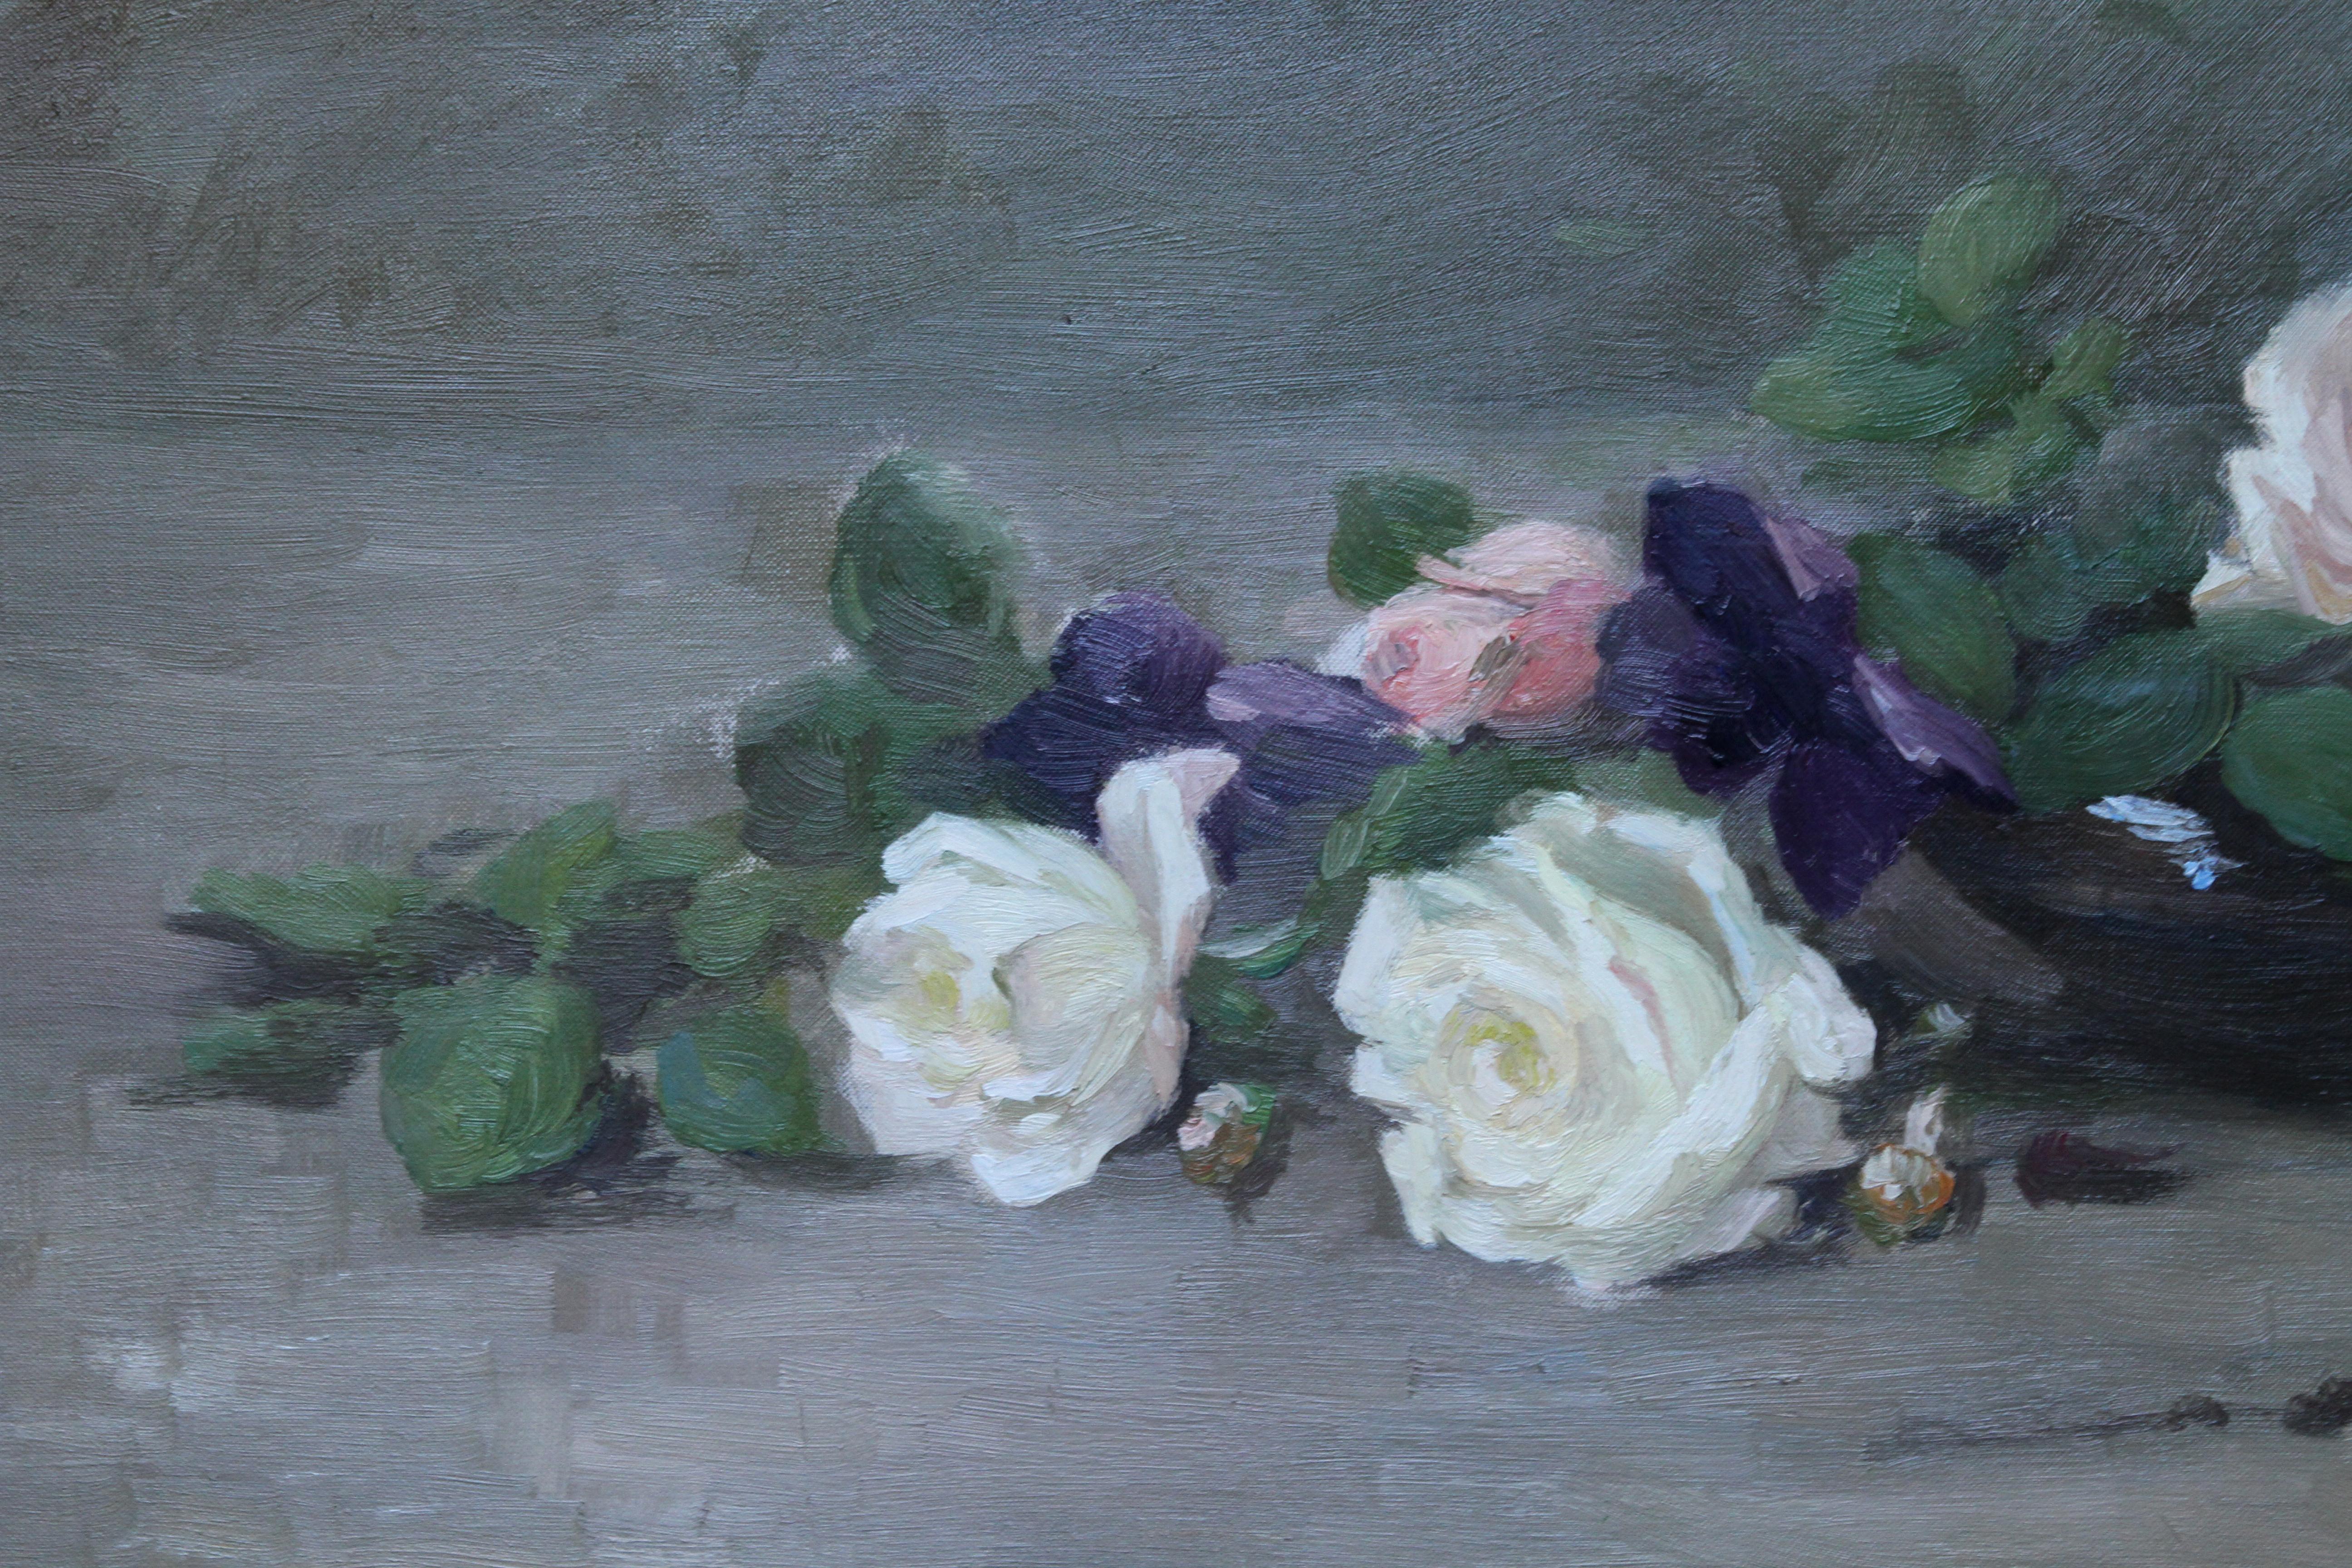 This beautiful Edwardian Scottish floral oil painting is by noted Scottish female artist Louise Ellen Perman. Perman exhibited 28 floral oil paintings at the Royal Scottish Academy from 1885-1920. This painting is from 1908 and was exhibited at the